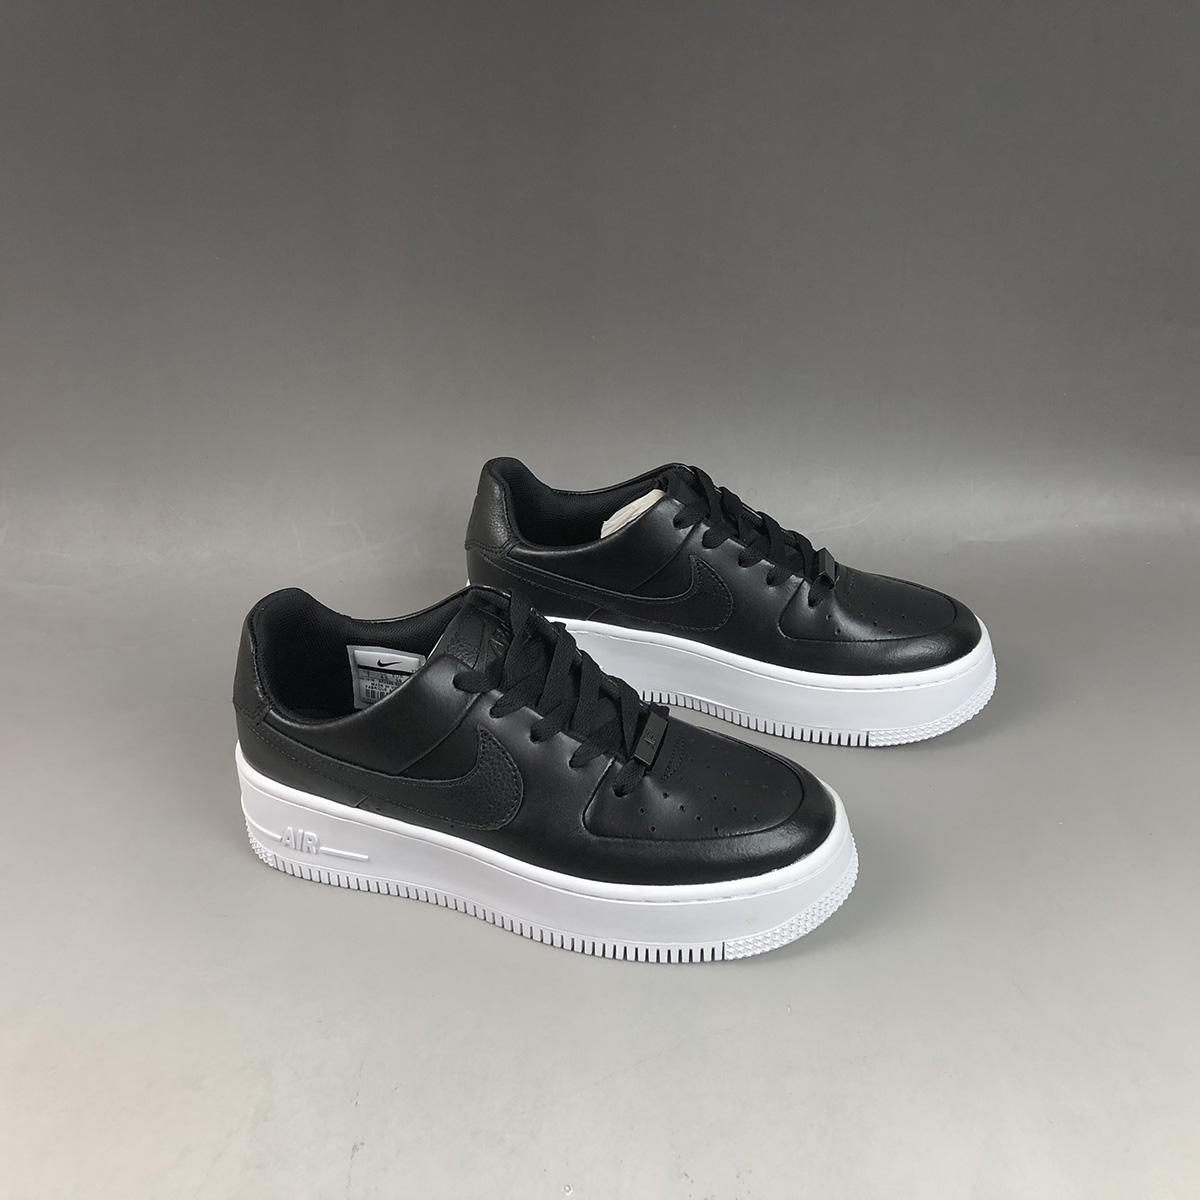 Nike Air Force 1 Sage Black/White For Sale – The Sole Line1200 x 1200